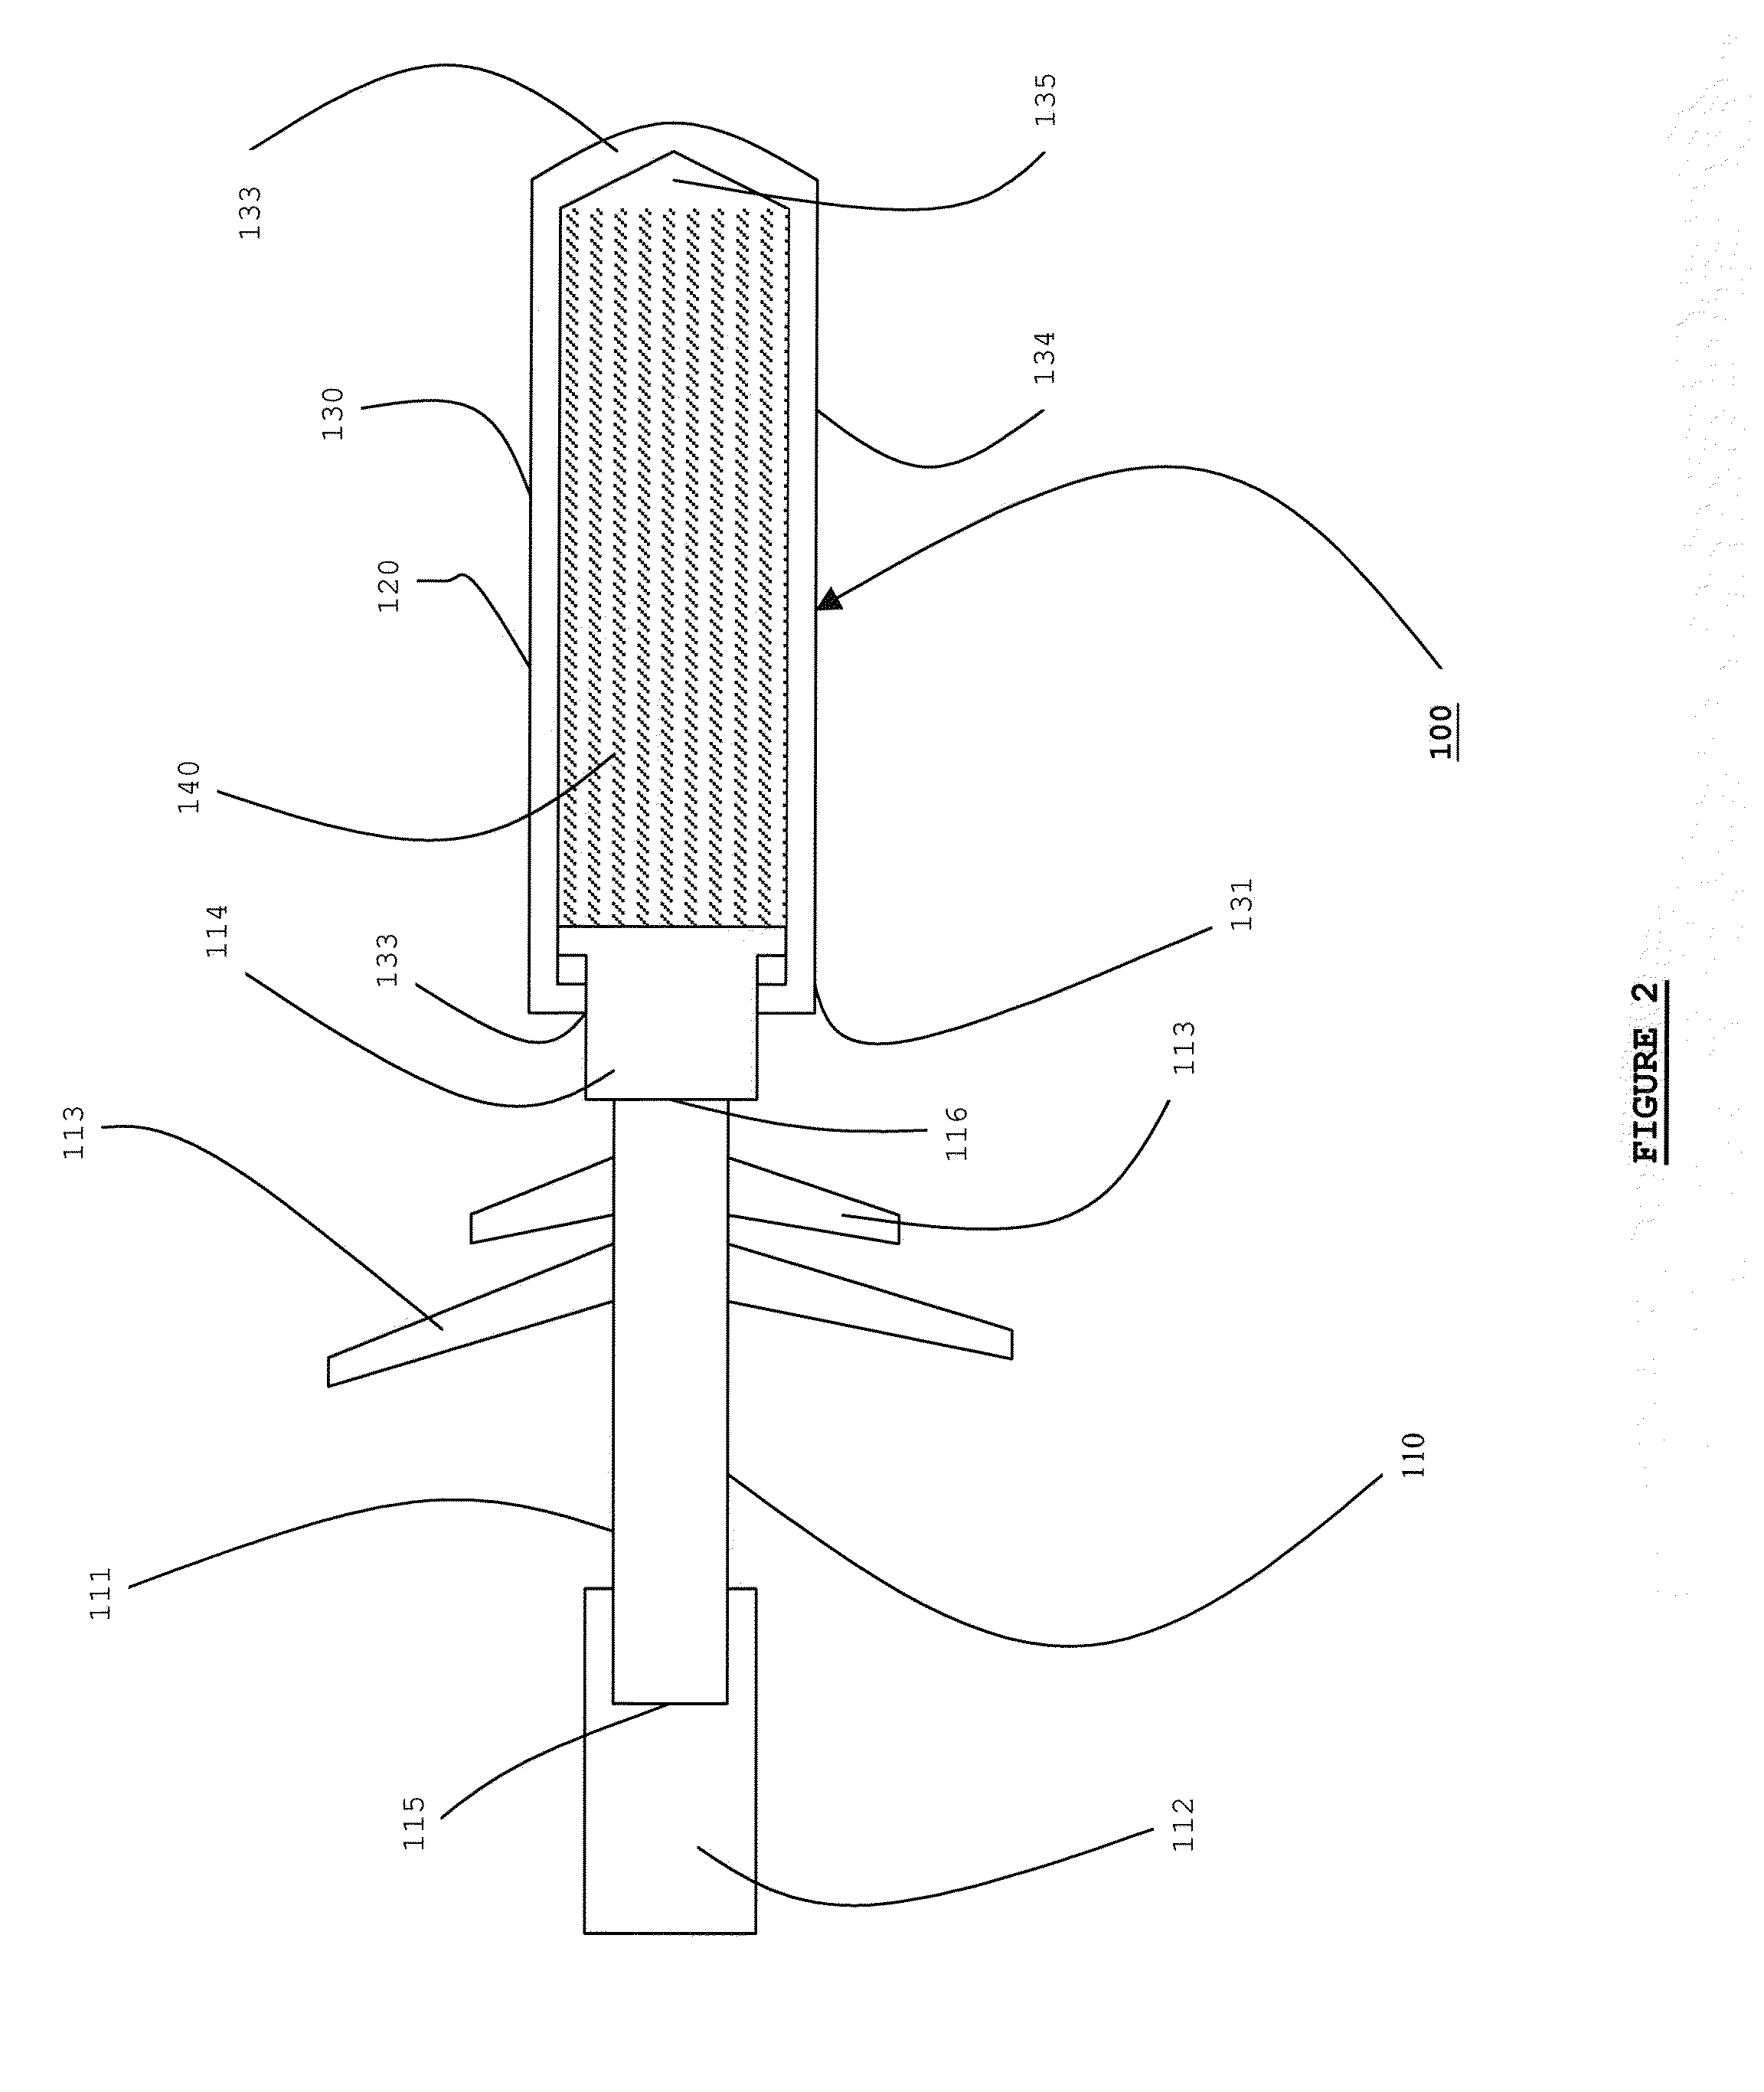 Method for relieving motion sickness and related apparatus